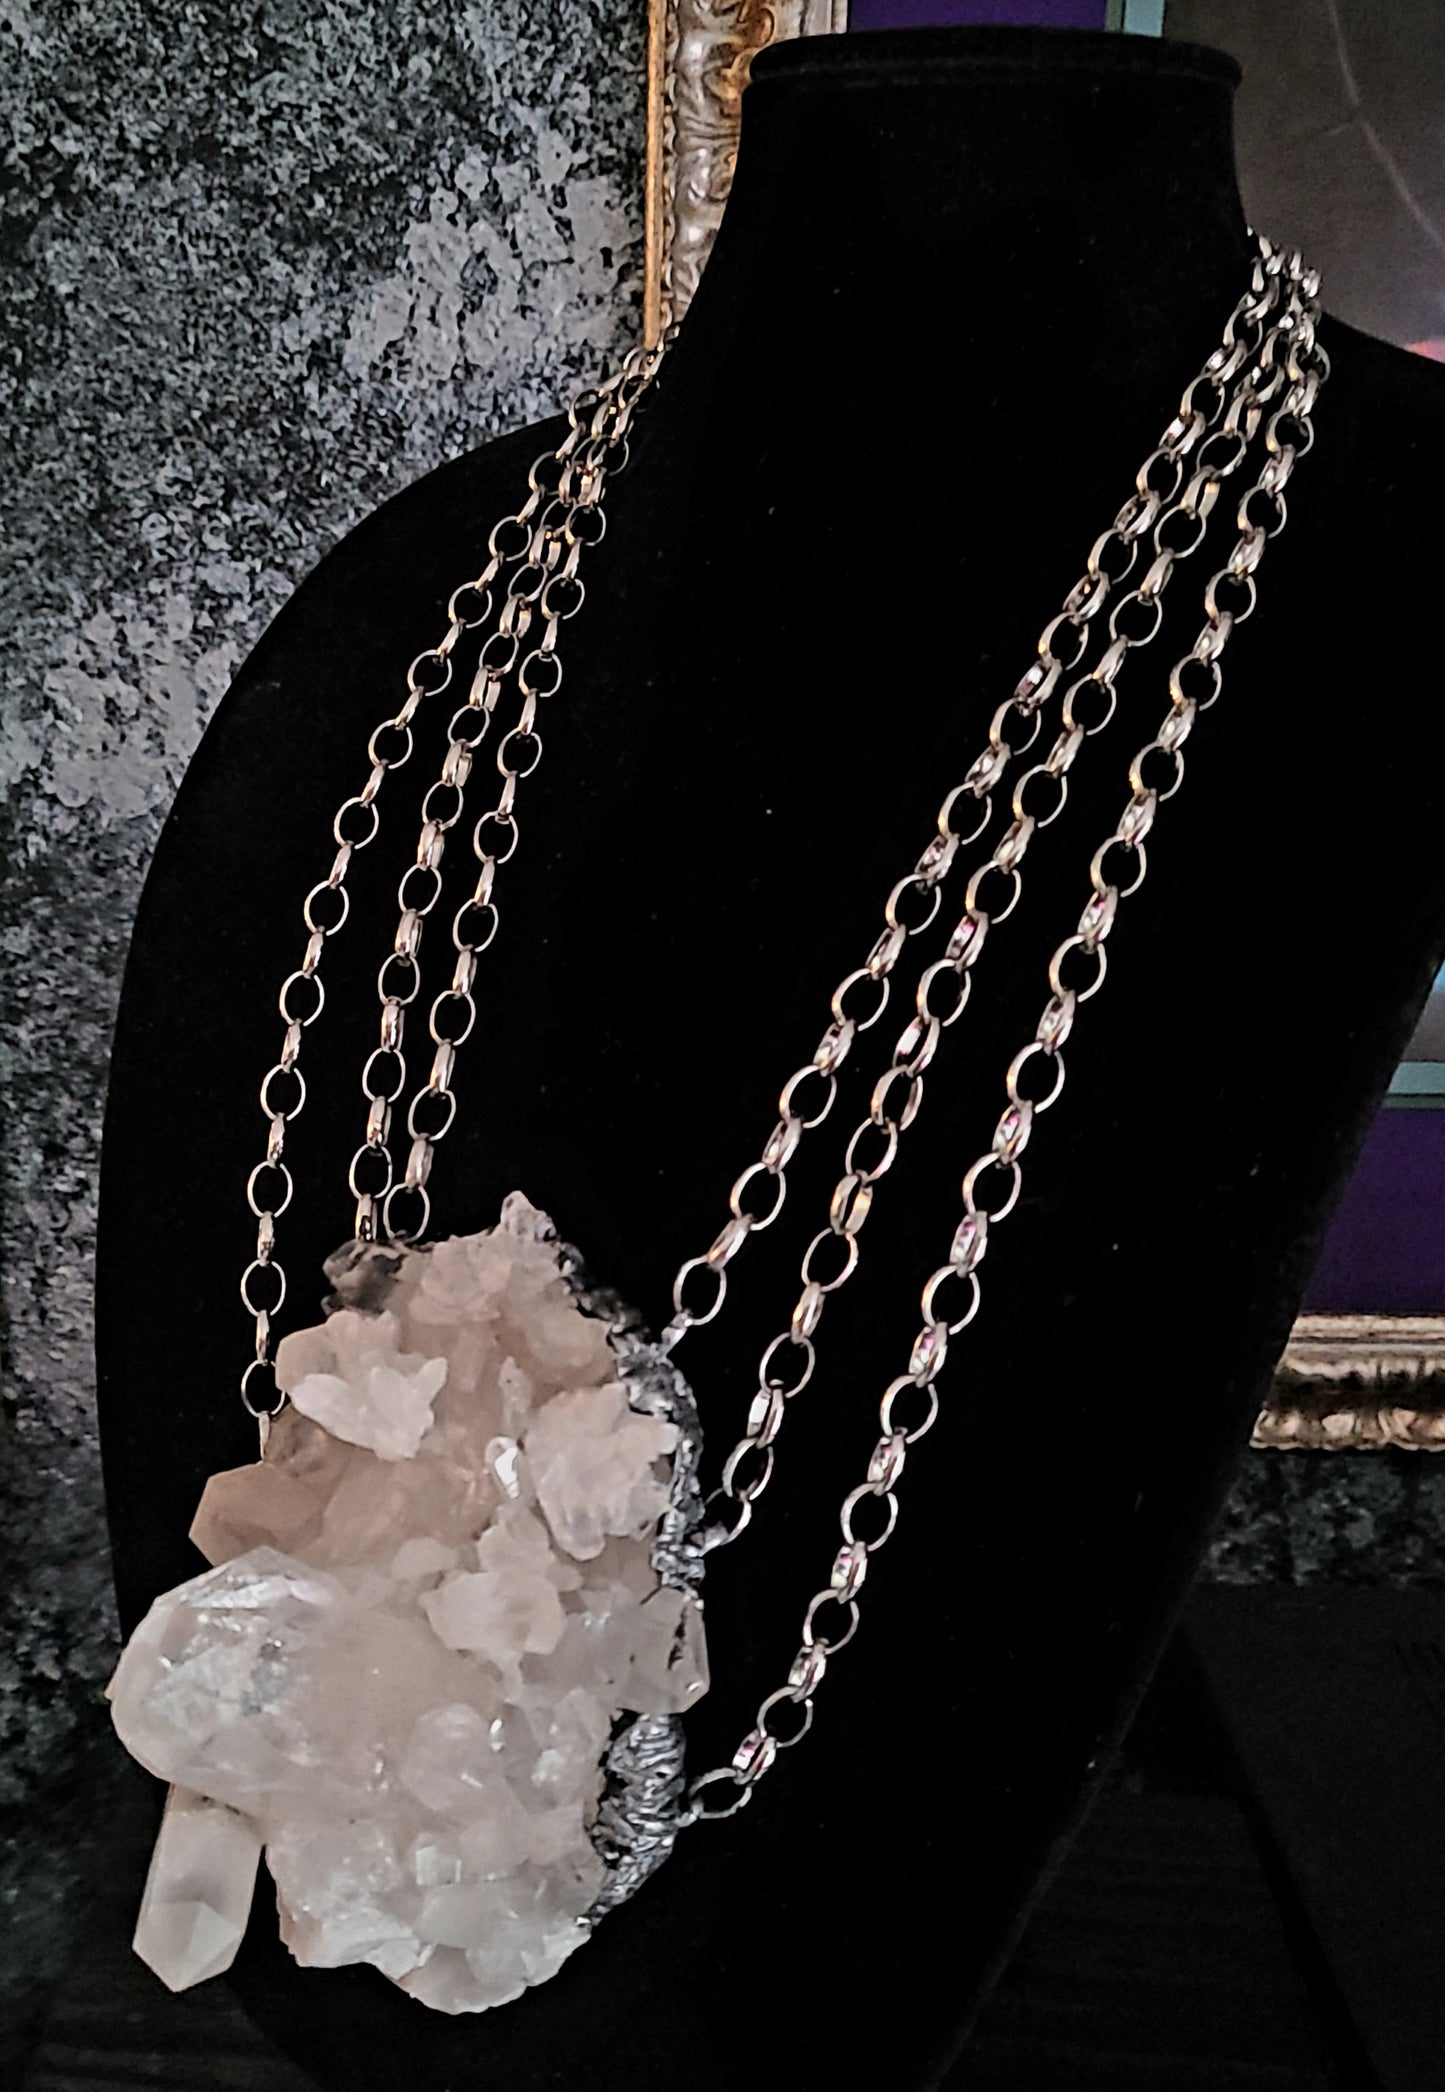 Raw Rough Quartz Cluster Chest Piece With Multiple Chains, Sculpted Avant Garde Statement Bib Necklace, Haute Couture Icy Pagan Amulet, Runway Ready Accessory, KatKouture